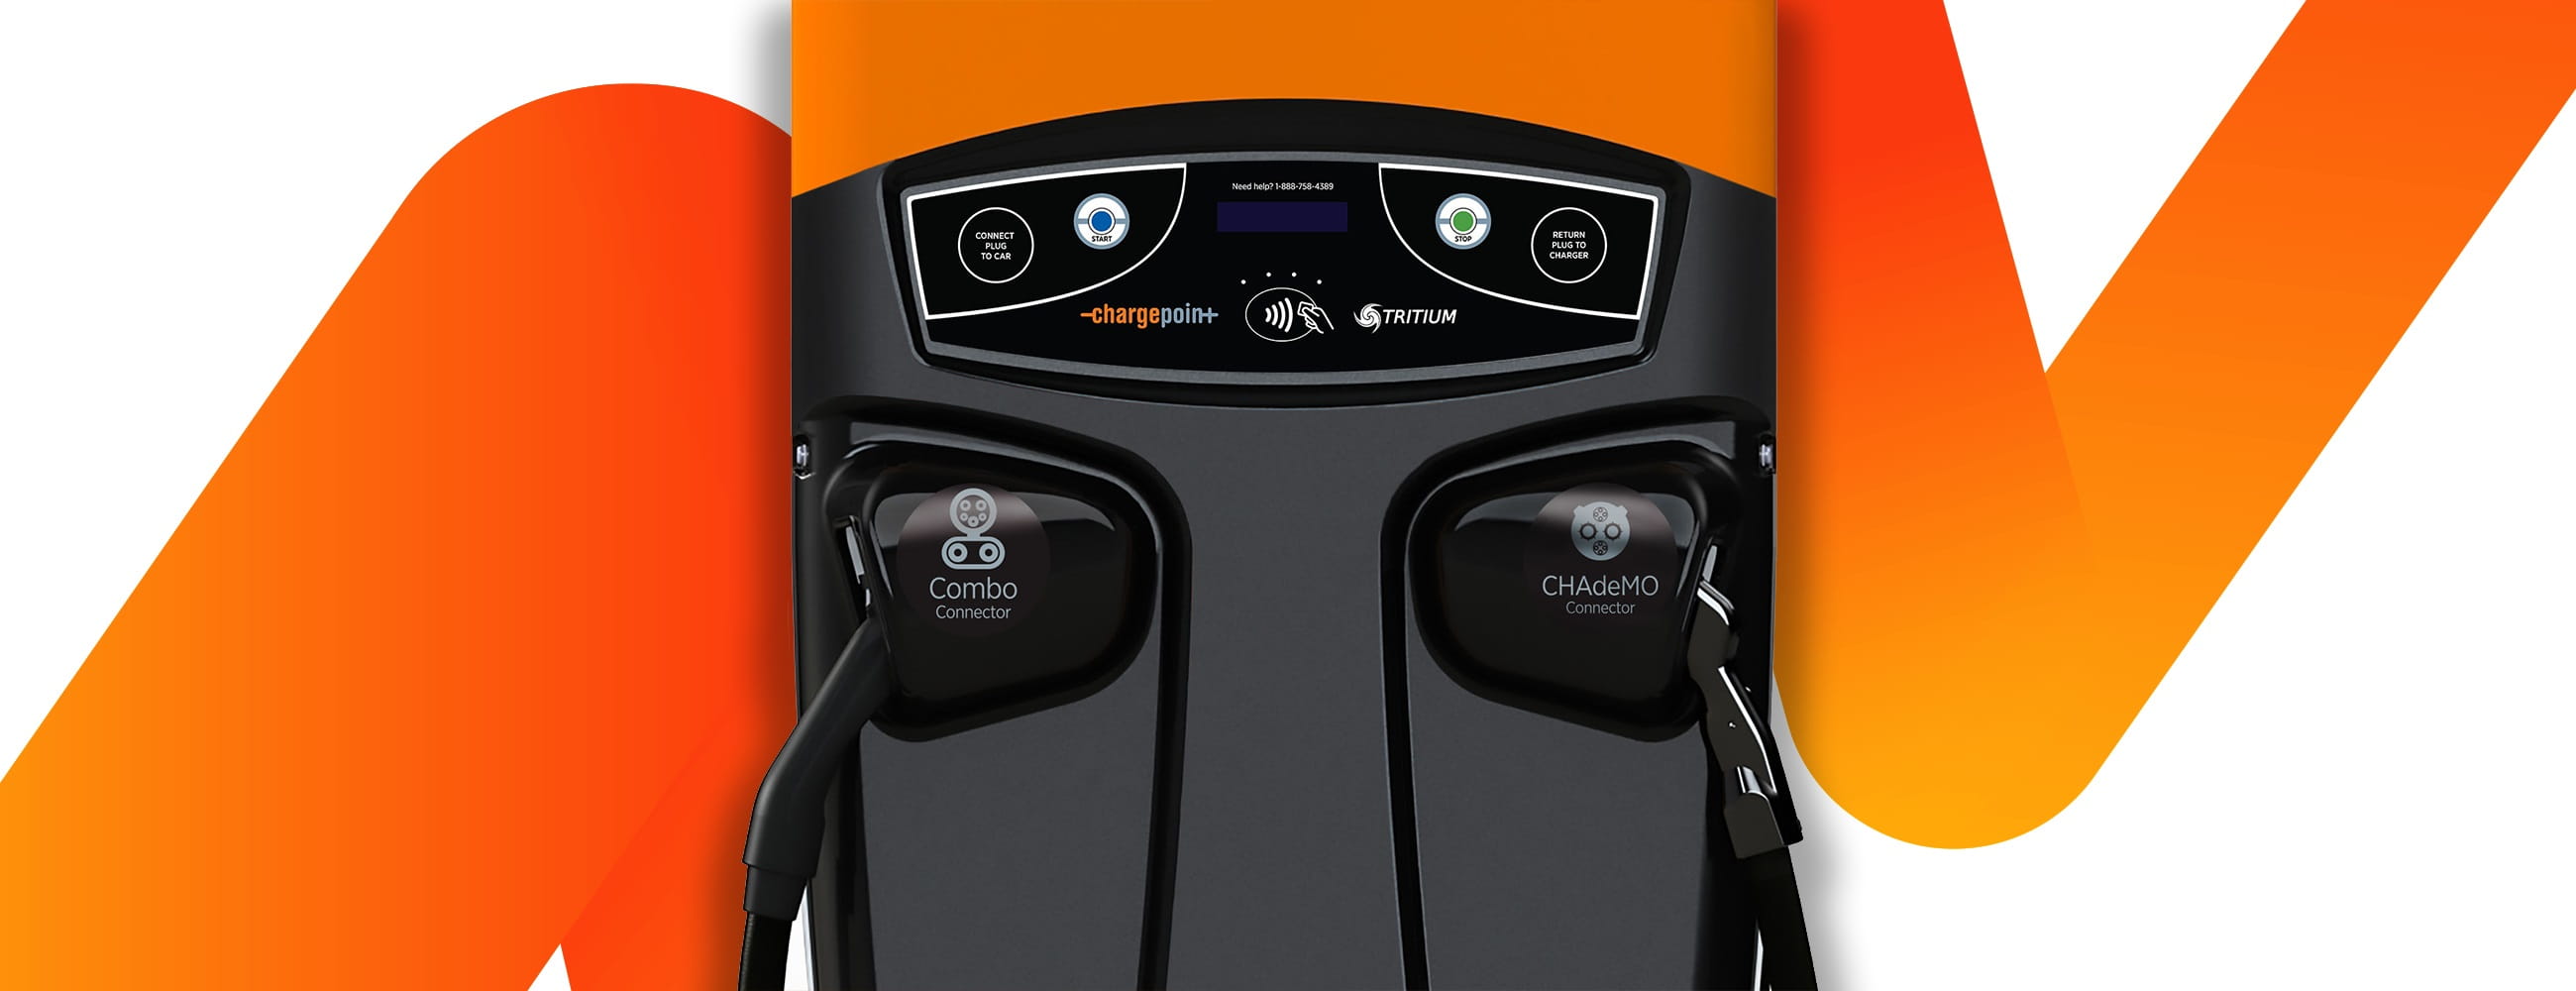 chargepoint_header_jp